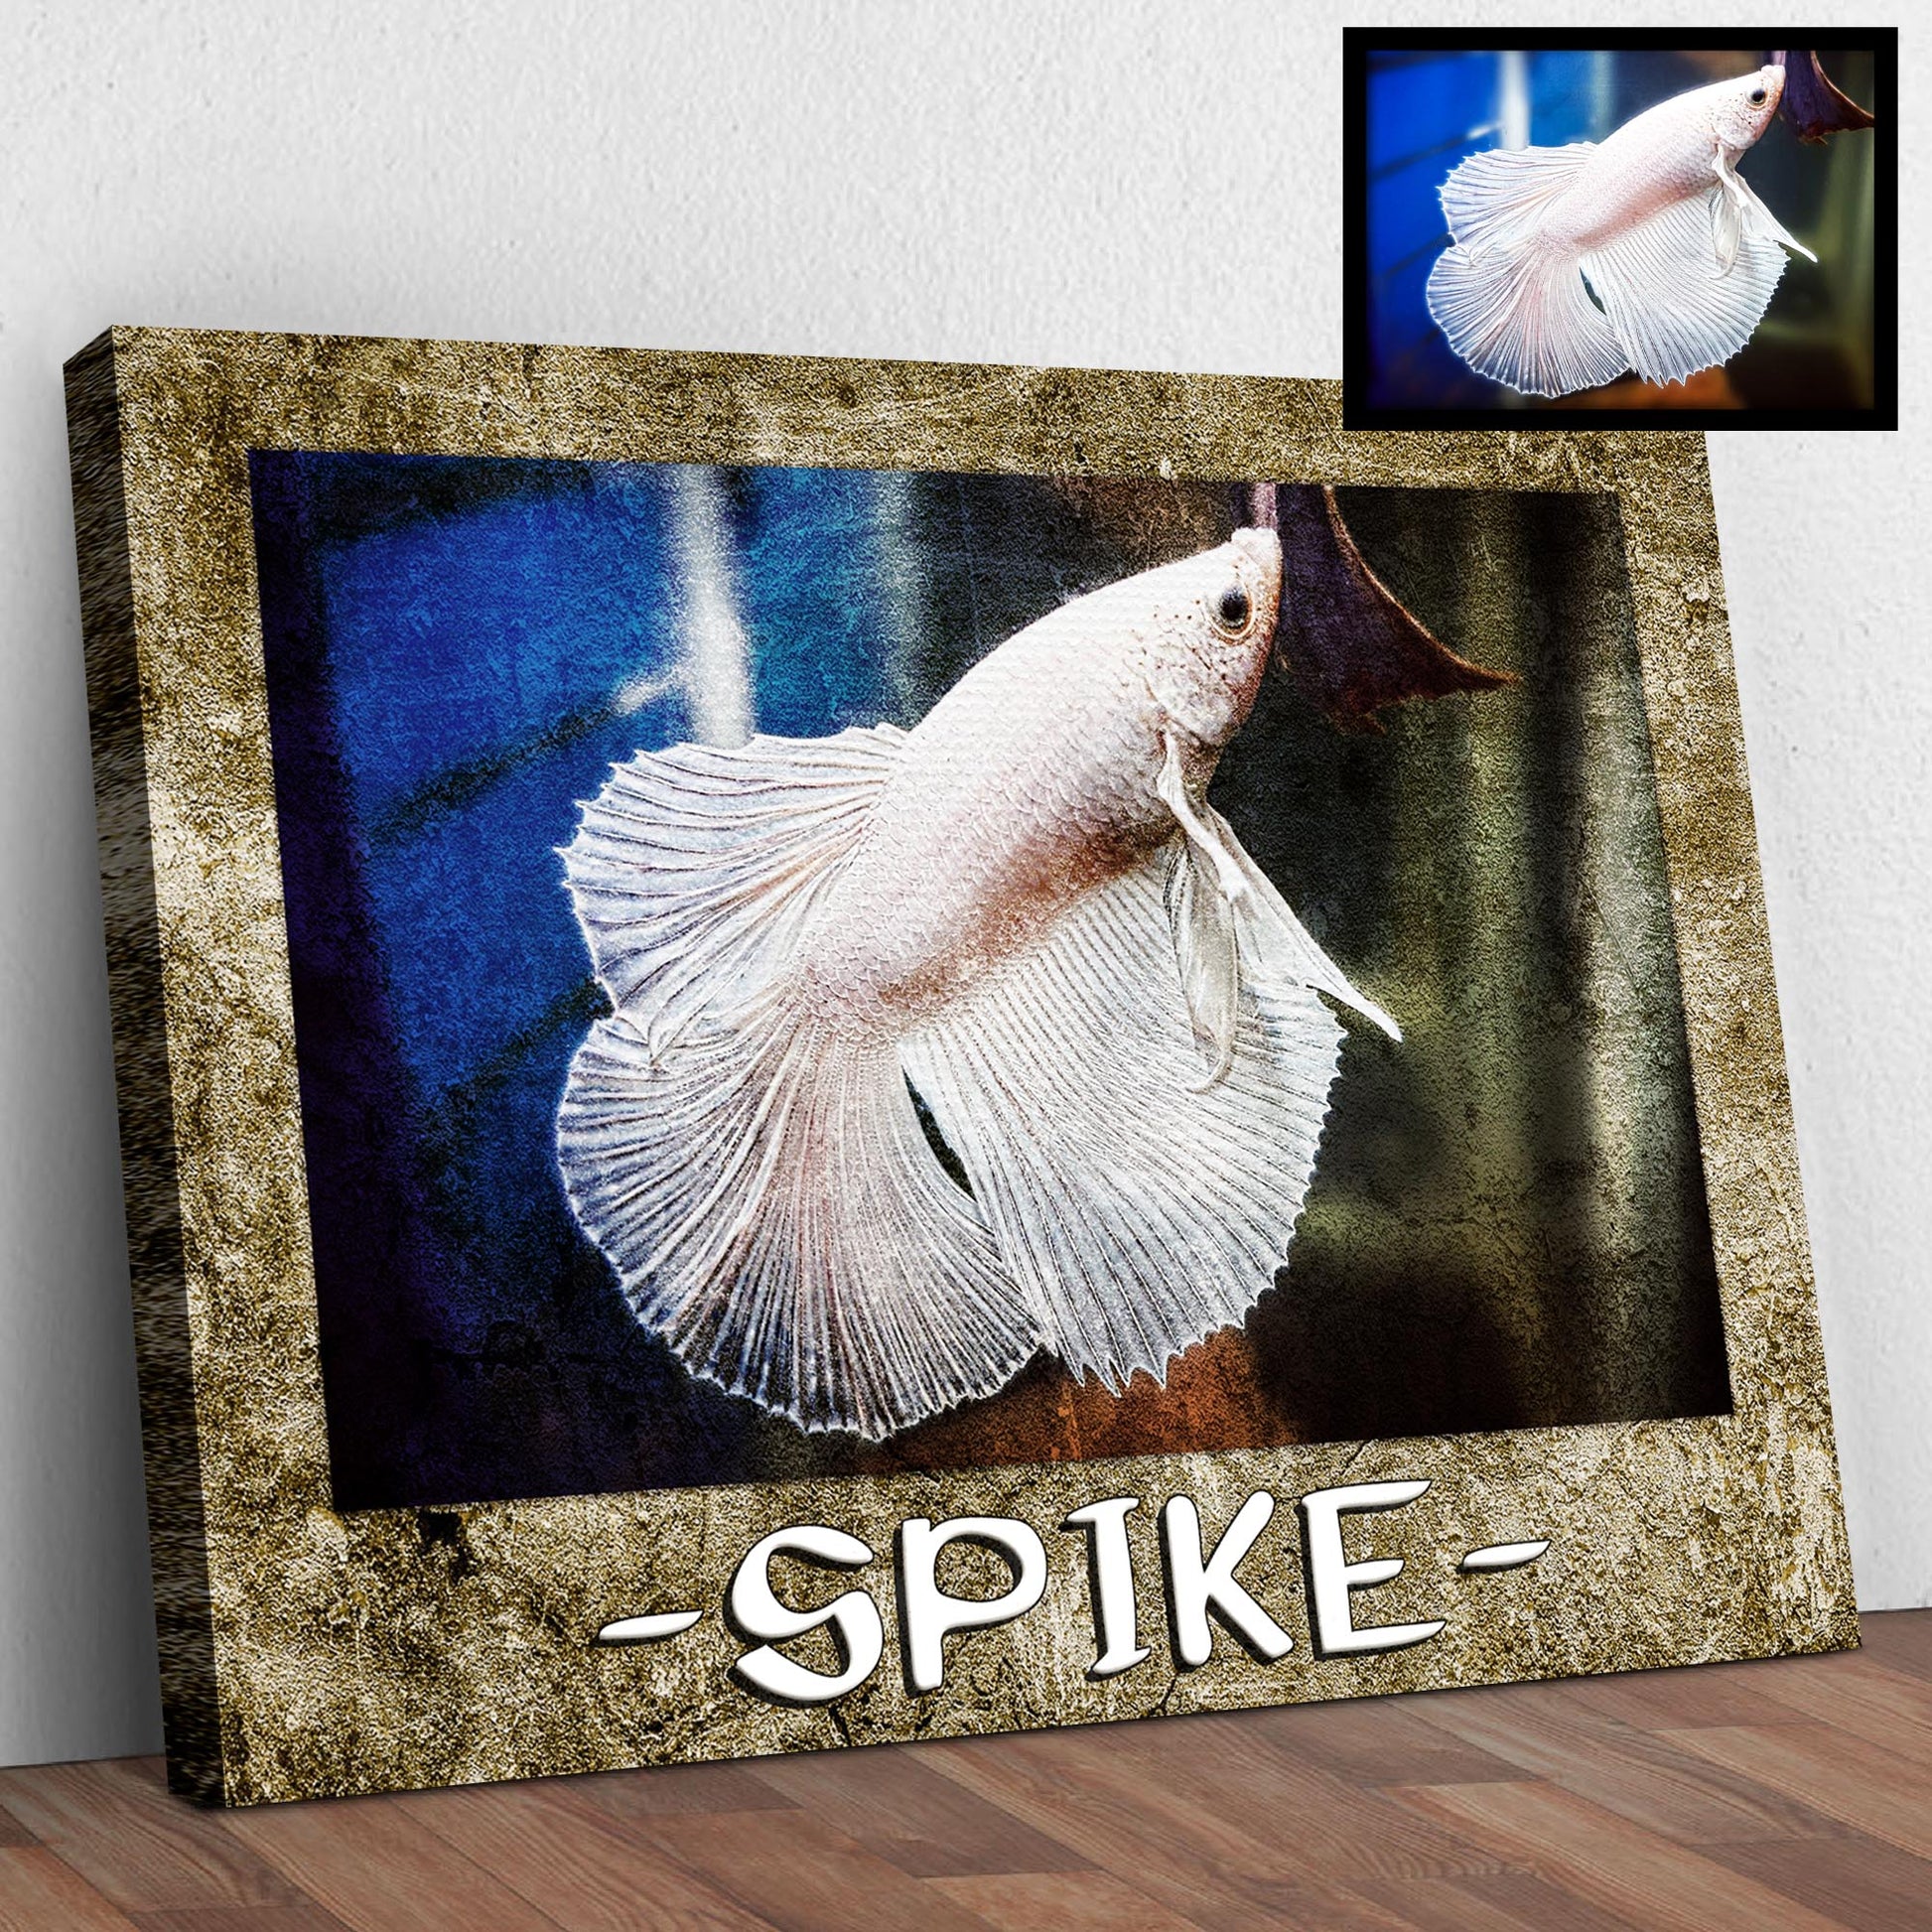 Fish Grunge Sign - Imaged by Tailored Canvases